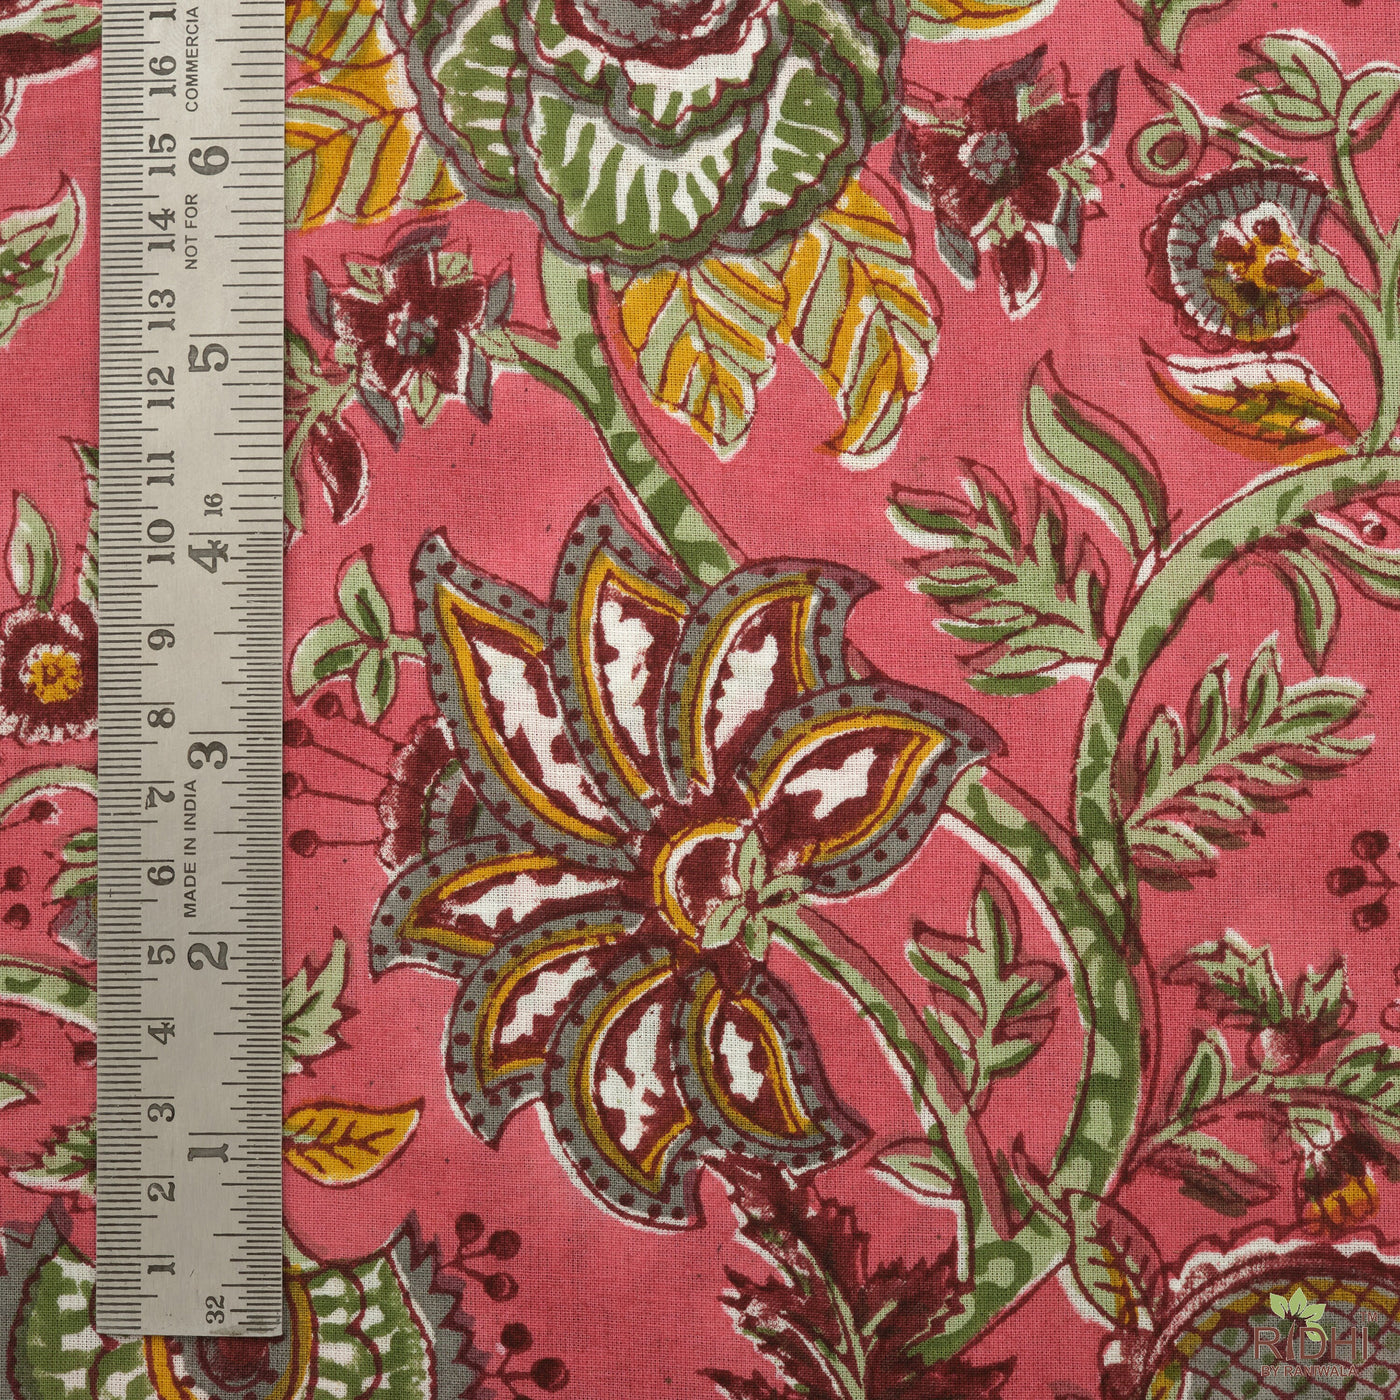 Thulian Pink, Fern Green, Tuscan Yellow Indian Floral Hand Block Printed 100% Pure Cotton Cloth, Fabric by the yard, Womens Clothing Curtain